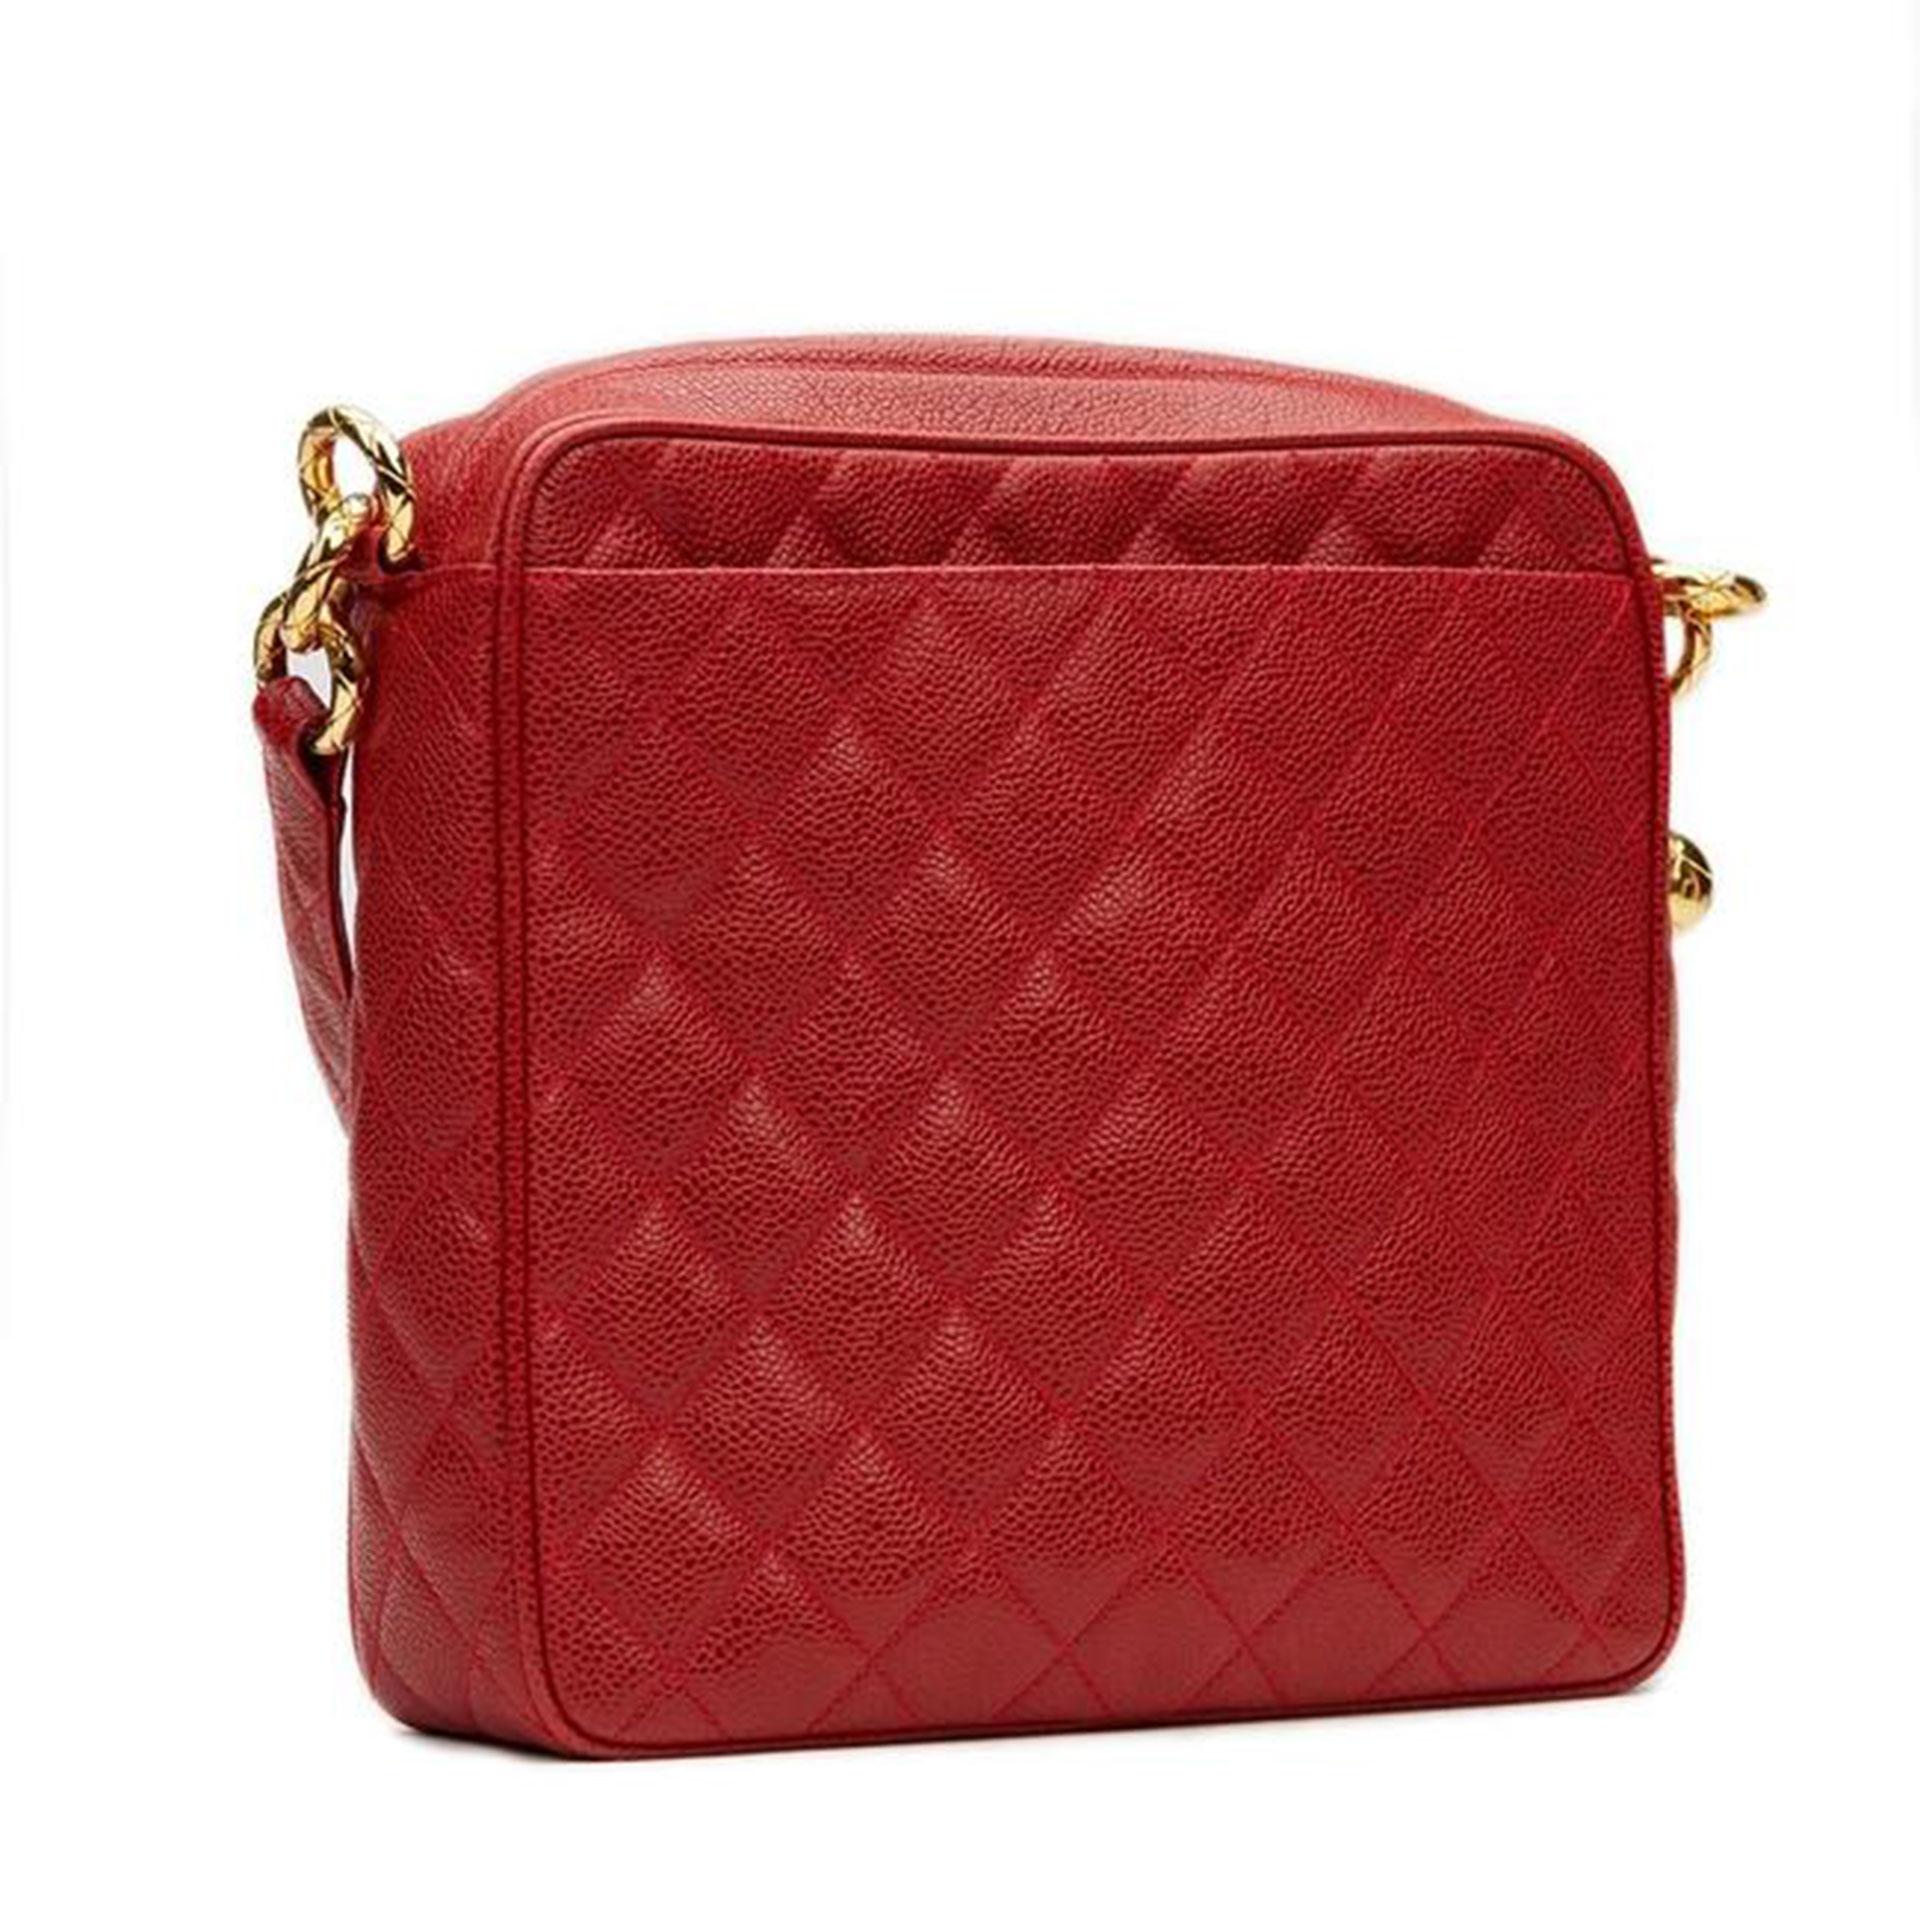 Chanel Classic Flap Vintage with Gold Hardware Red Caviar Leather Cross Body Bag In Good Condition For Sale In Miami, FL